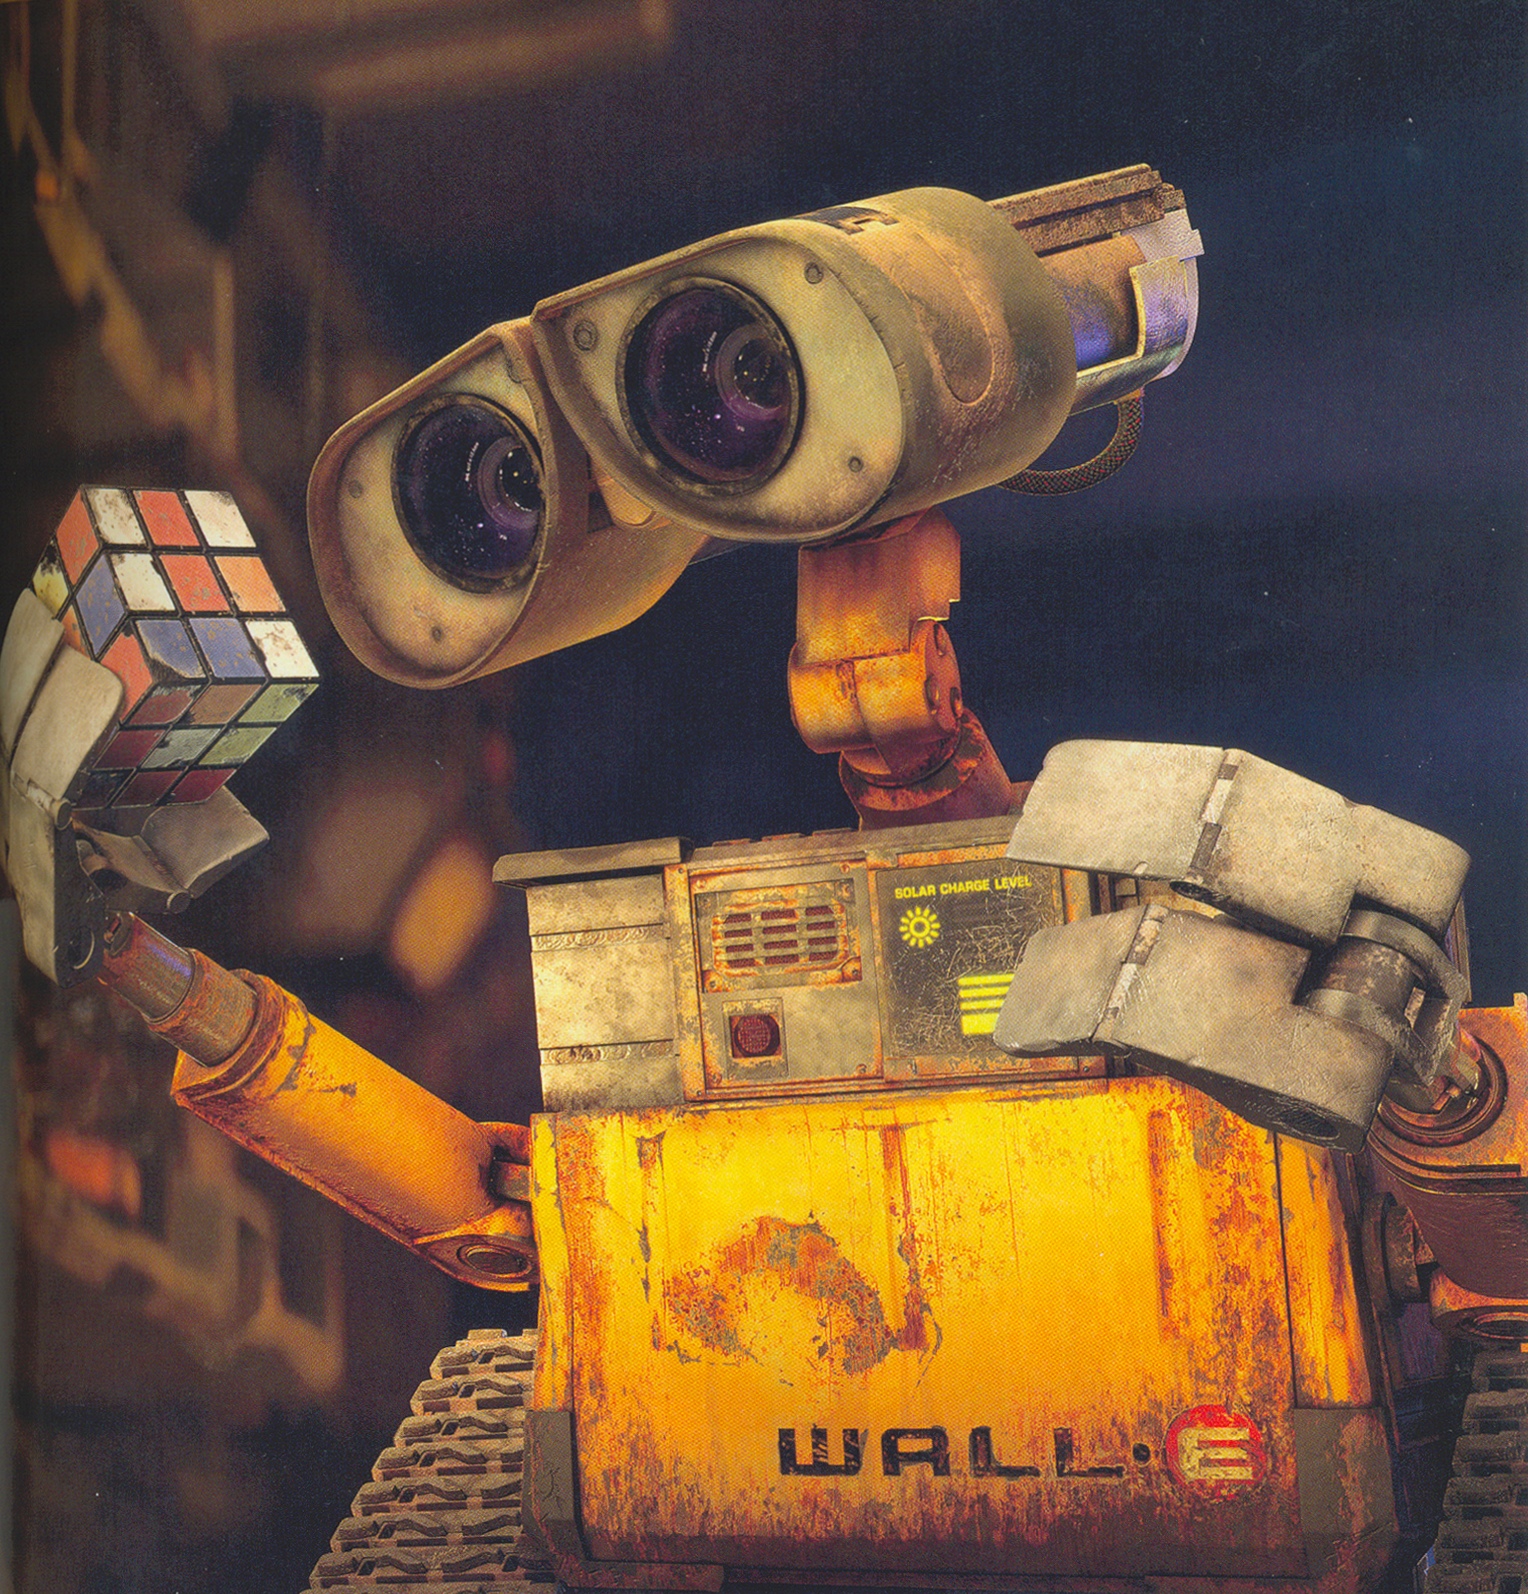 http://casualimages.files.wordpress.com/2009/02/walle.jpg